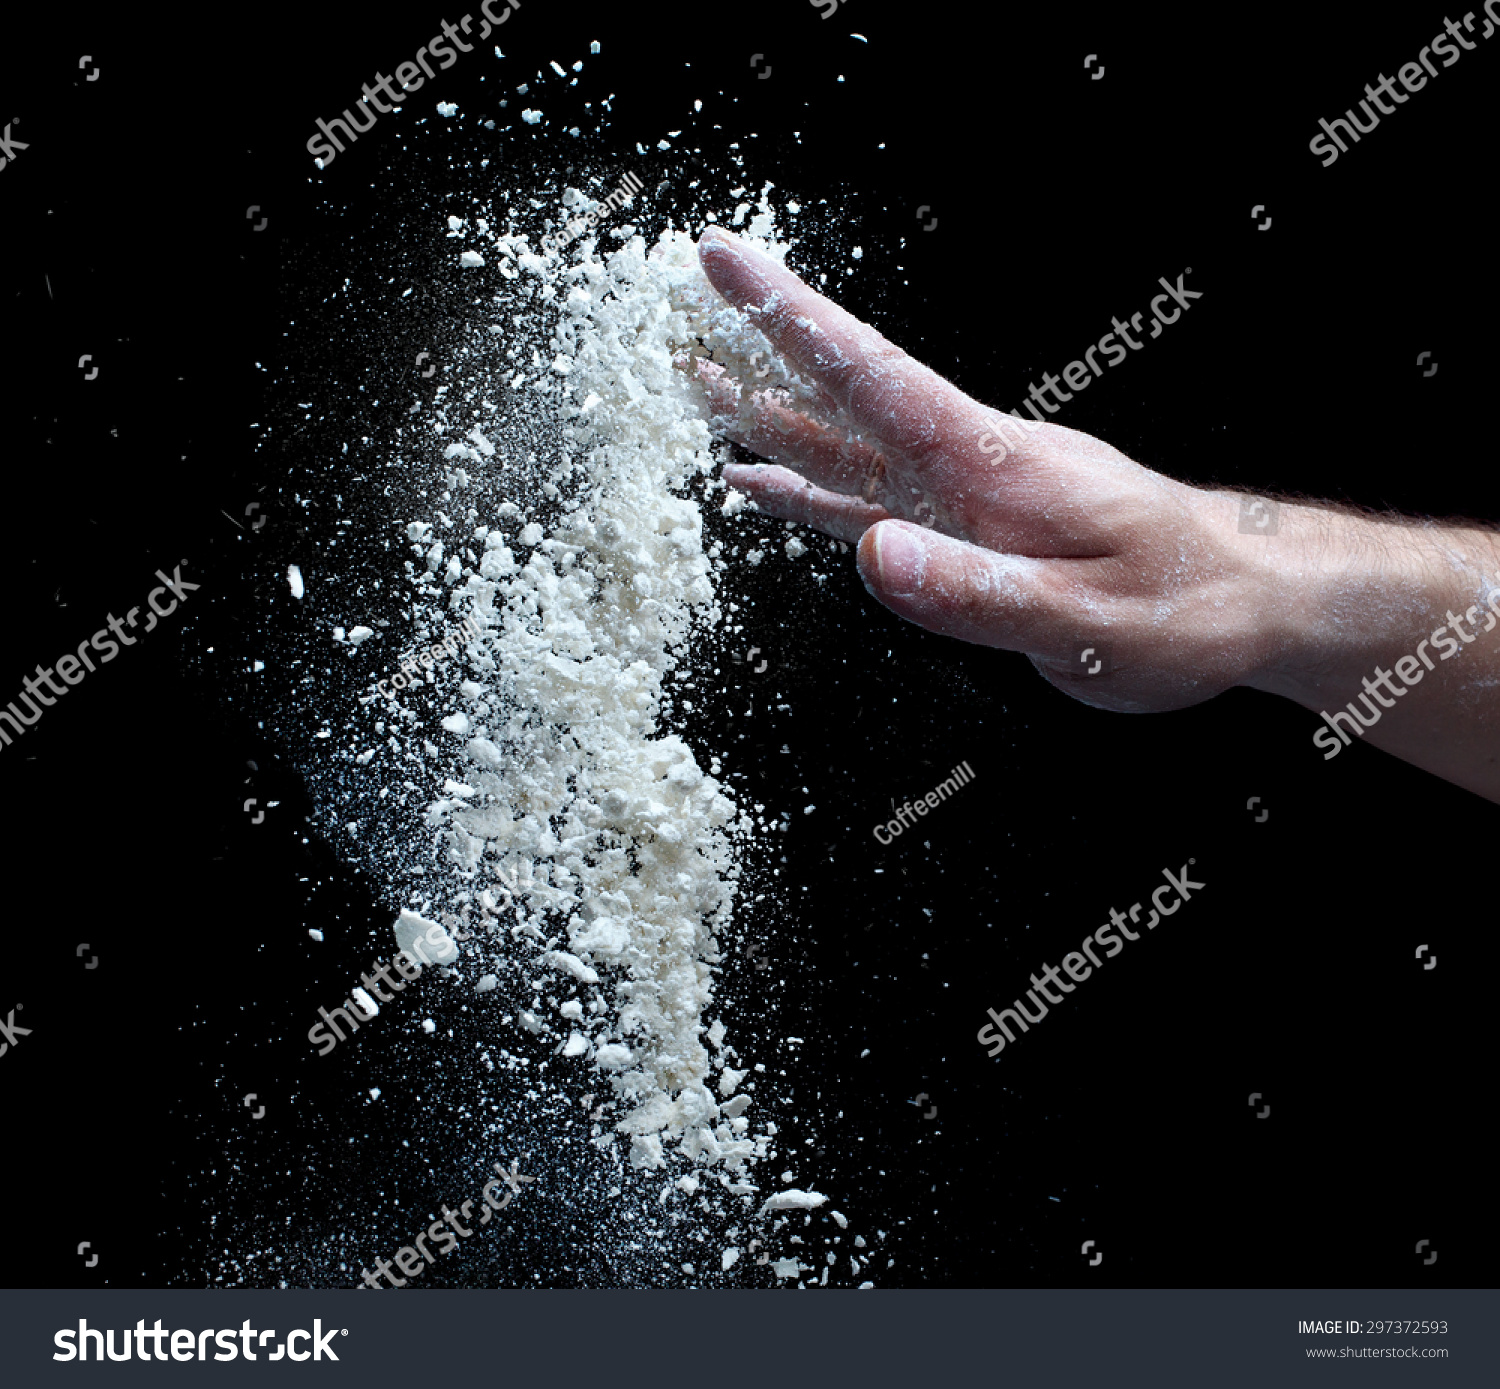 
the man's hand and a handful of flour isolated on a black background #297372593